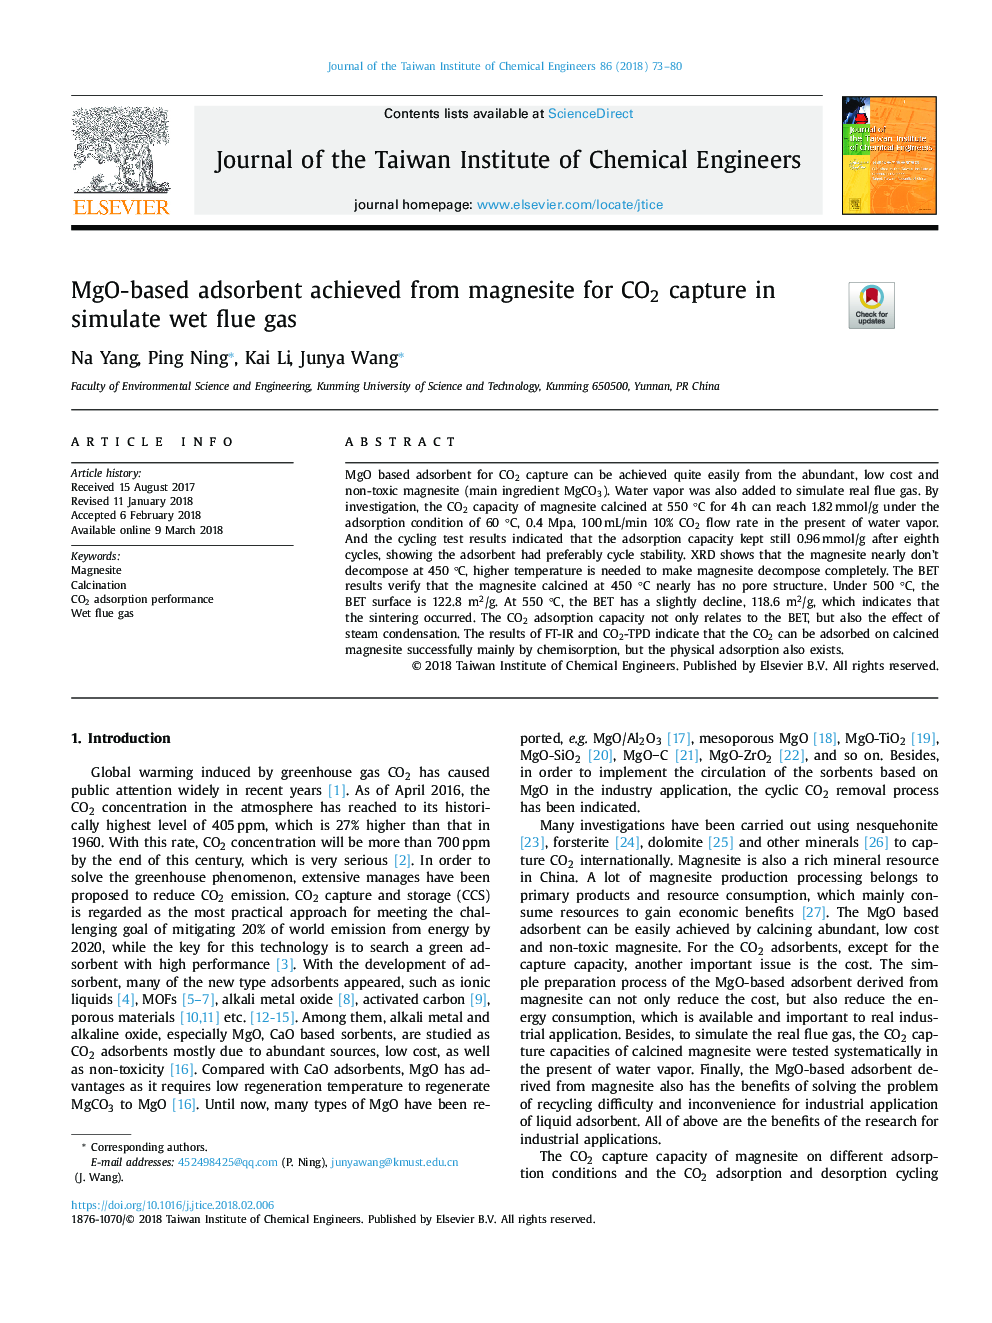 MgO-based adsorbent achieved from magnesite for CO2 capture in simulate wet flue gas